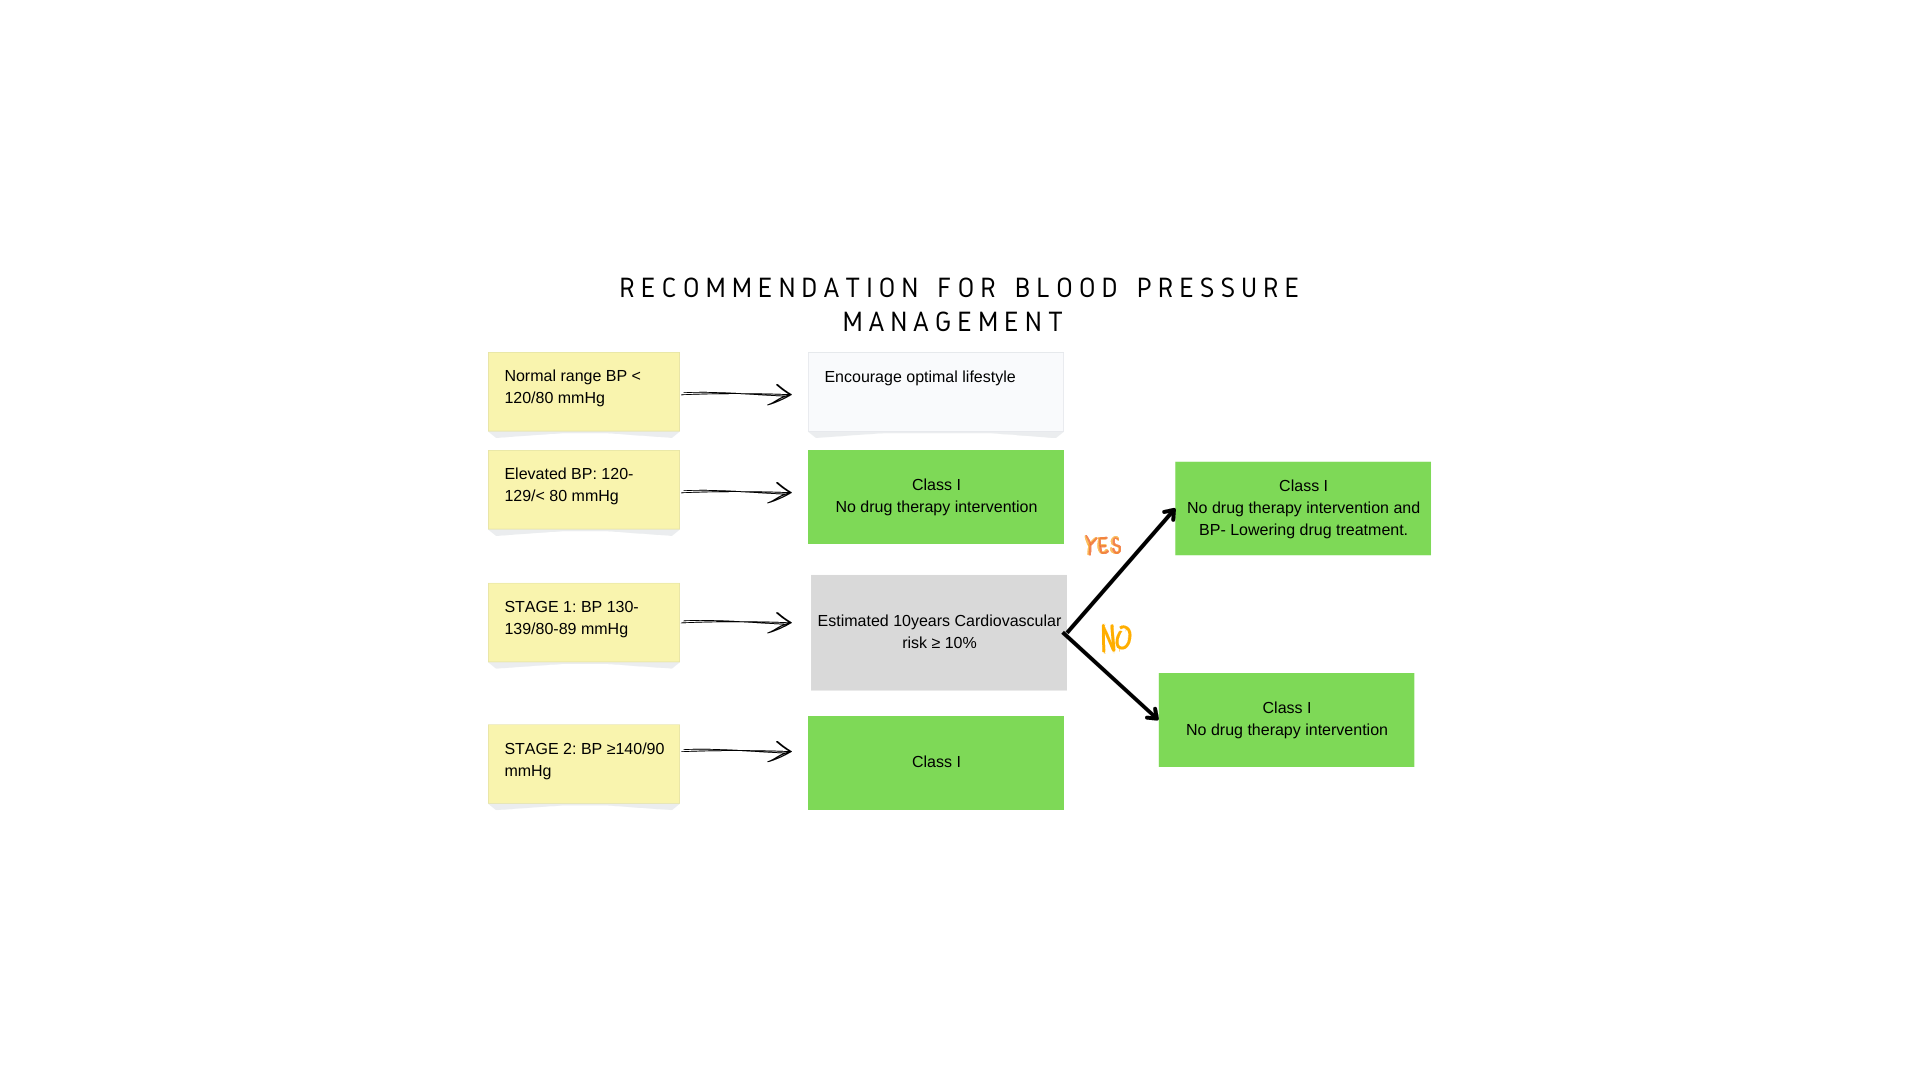 Adapted from the 2019 ACC/AHA Guideline on the Primary Prevention of Cardiovascular Disease.